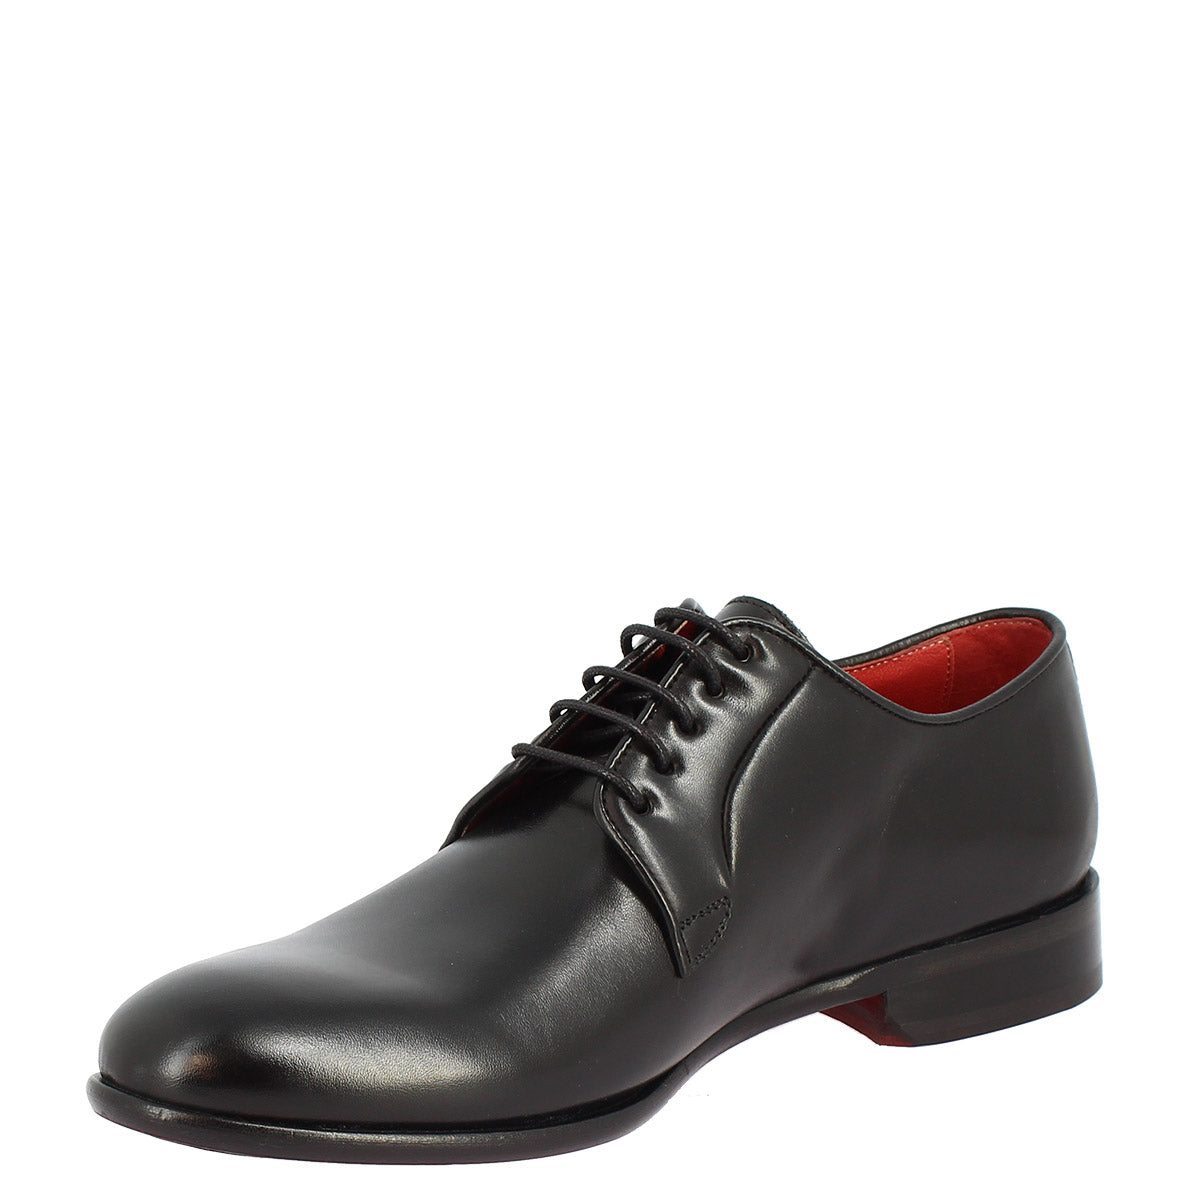 Men's handmade lace-up shoes in black leather